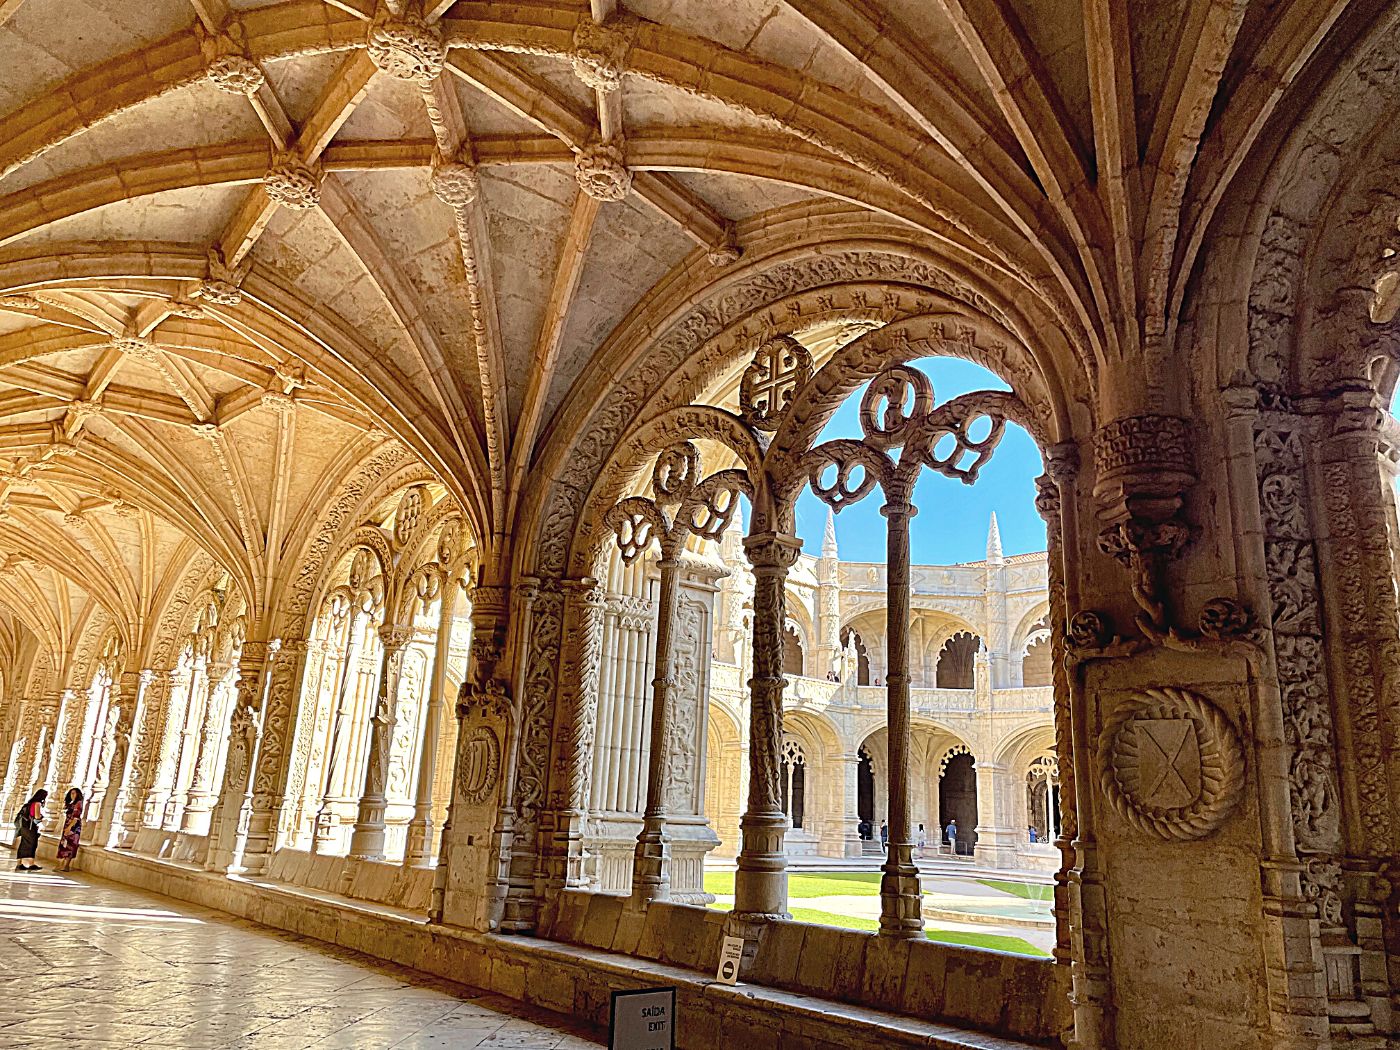 Jeronimos Monastery Cloisters, decorative arches and interior courtyard